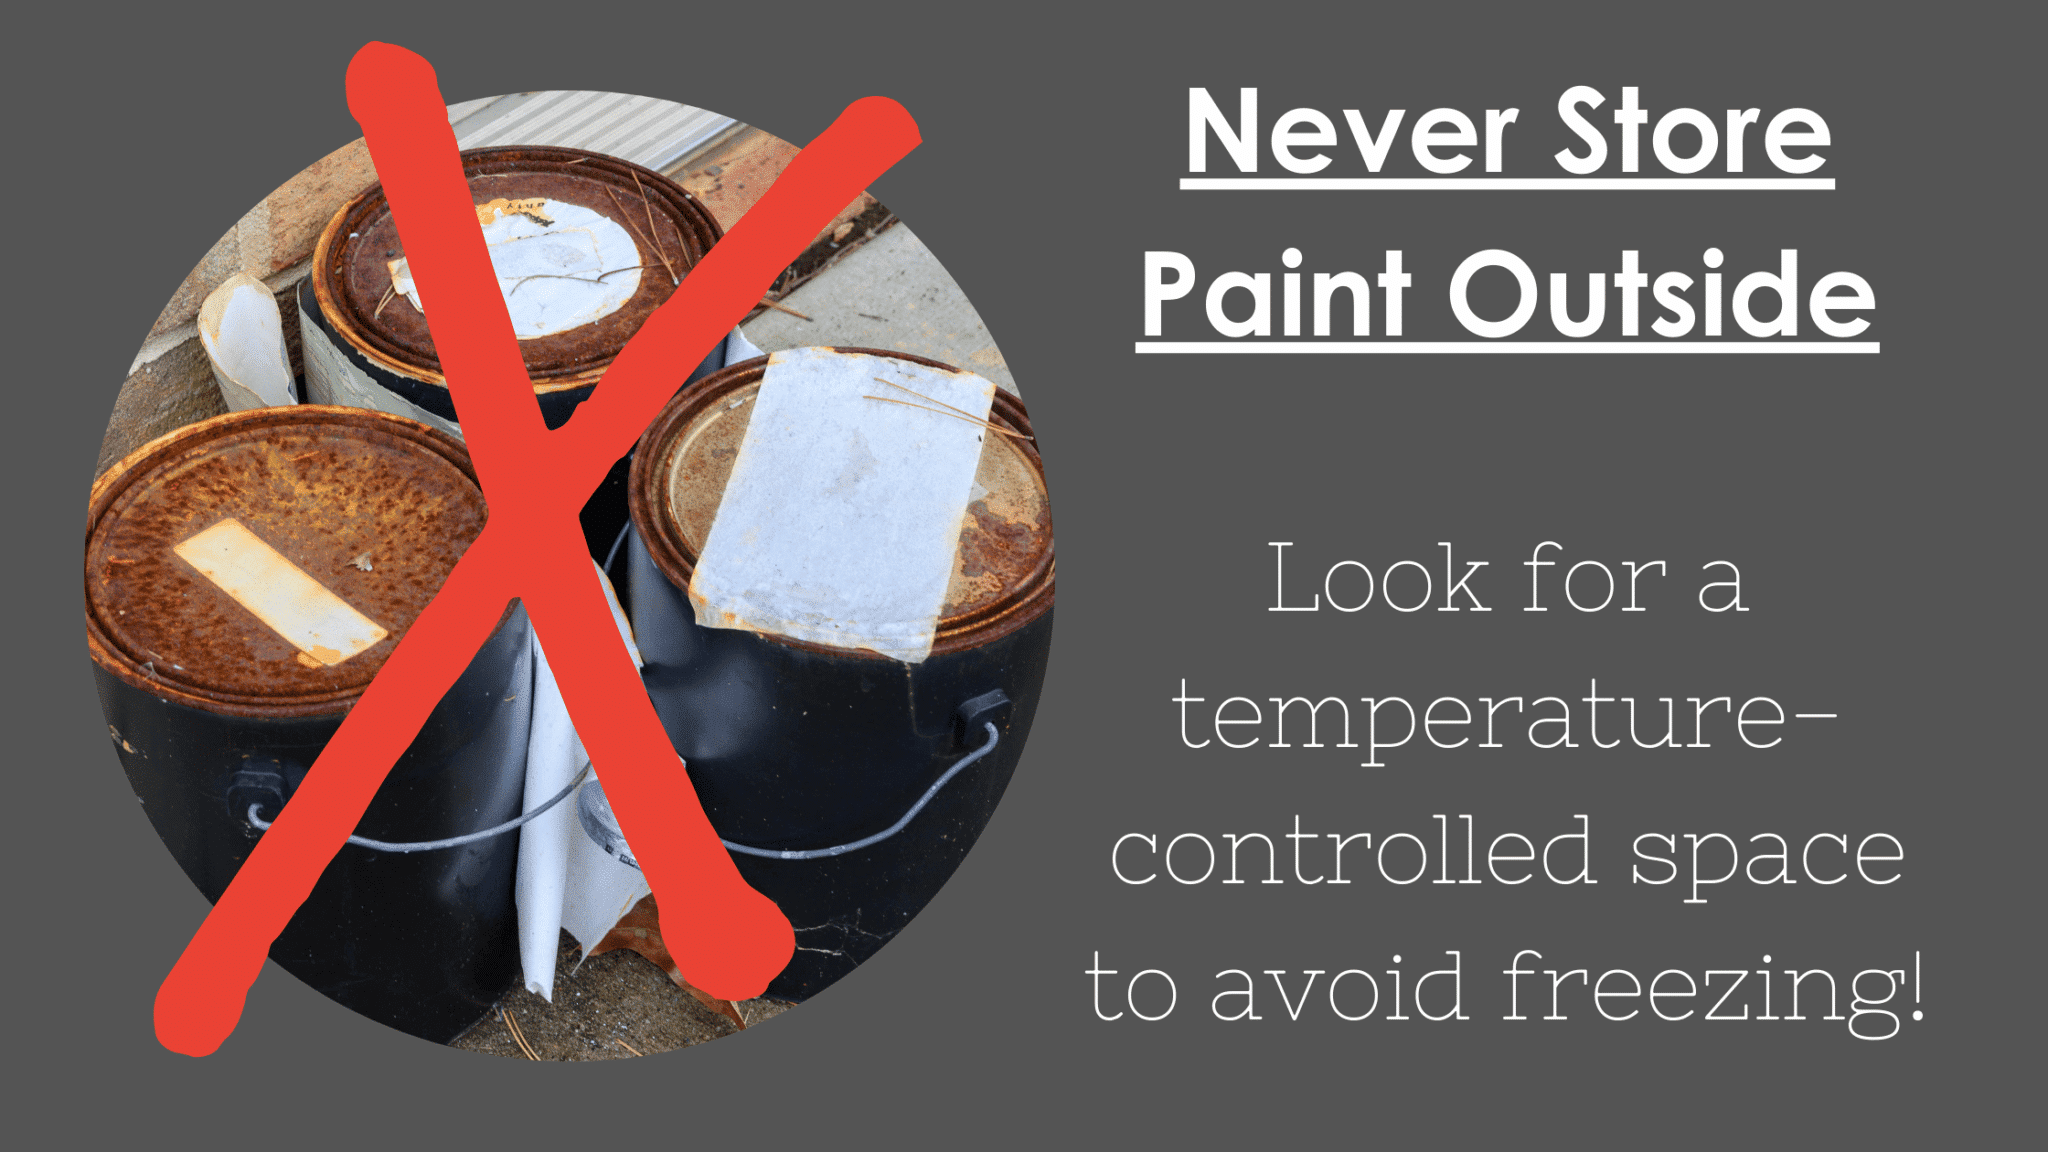 storing paint outside or in non-temperature controlled areas can cause paint to go bad.